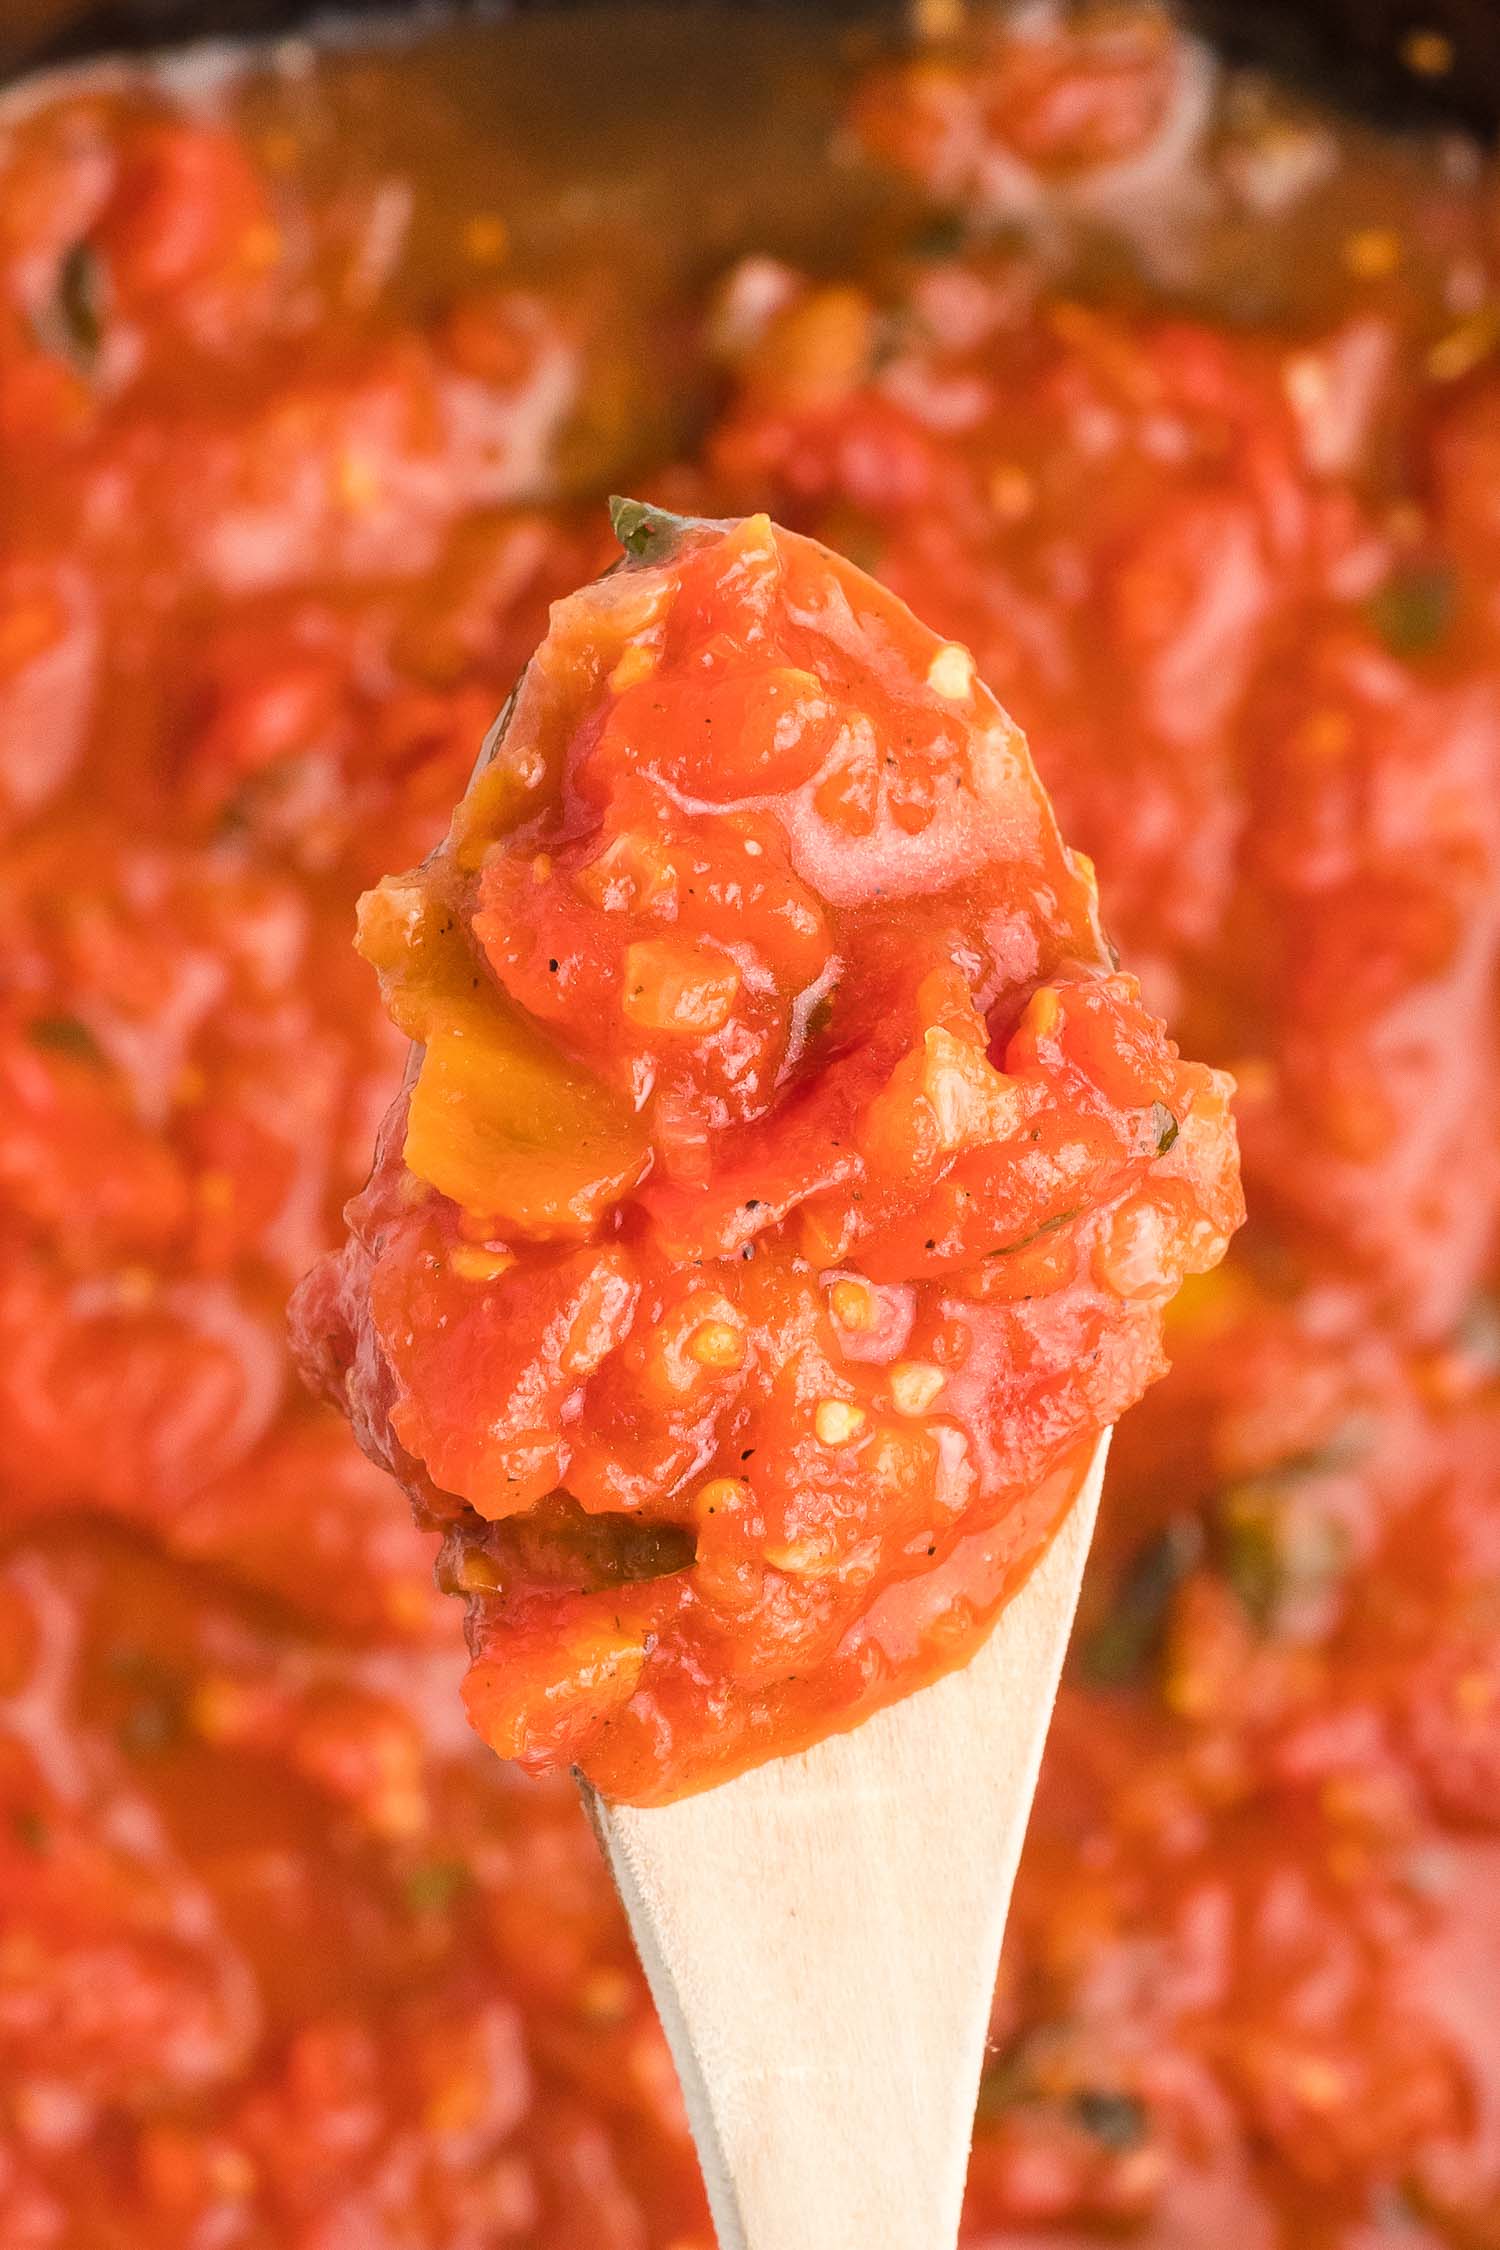 Tomato sauce with a wooden spoon holding some of it up in the front.